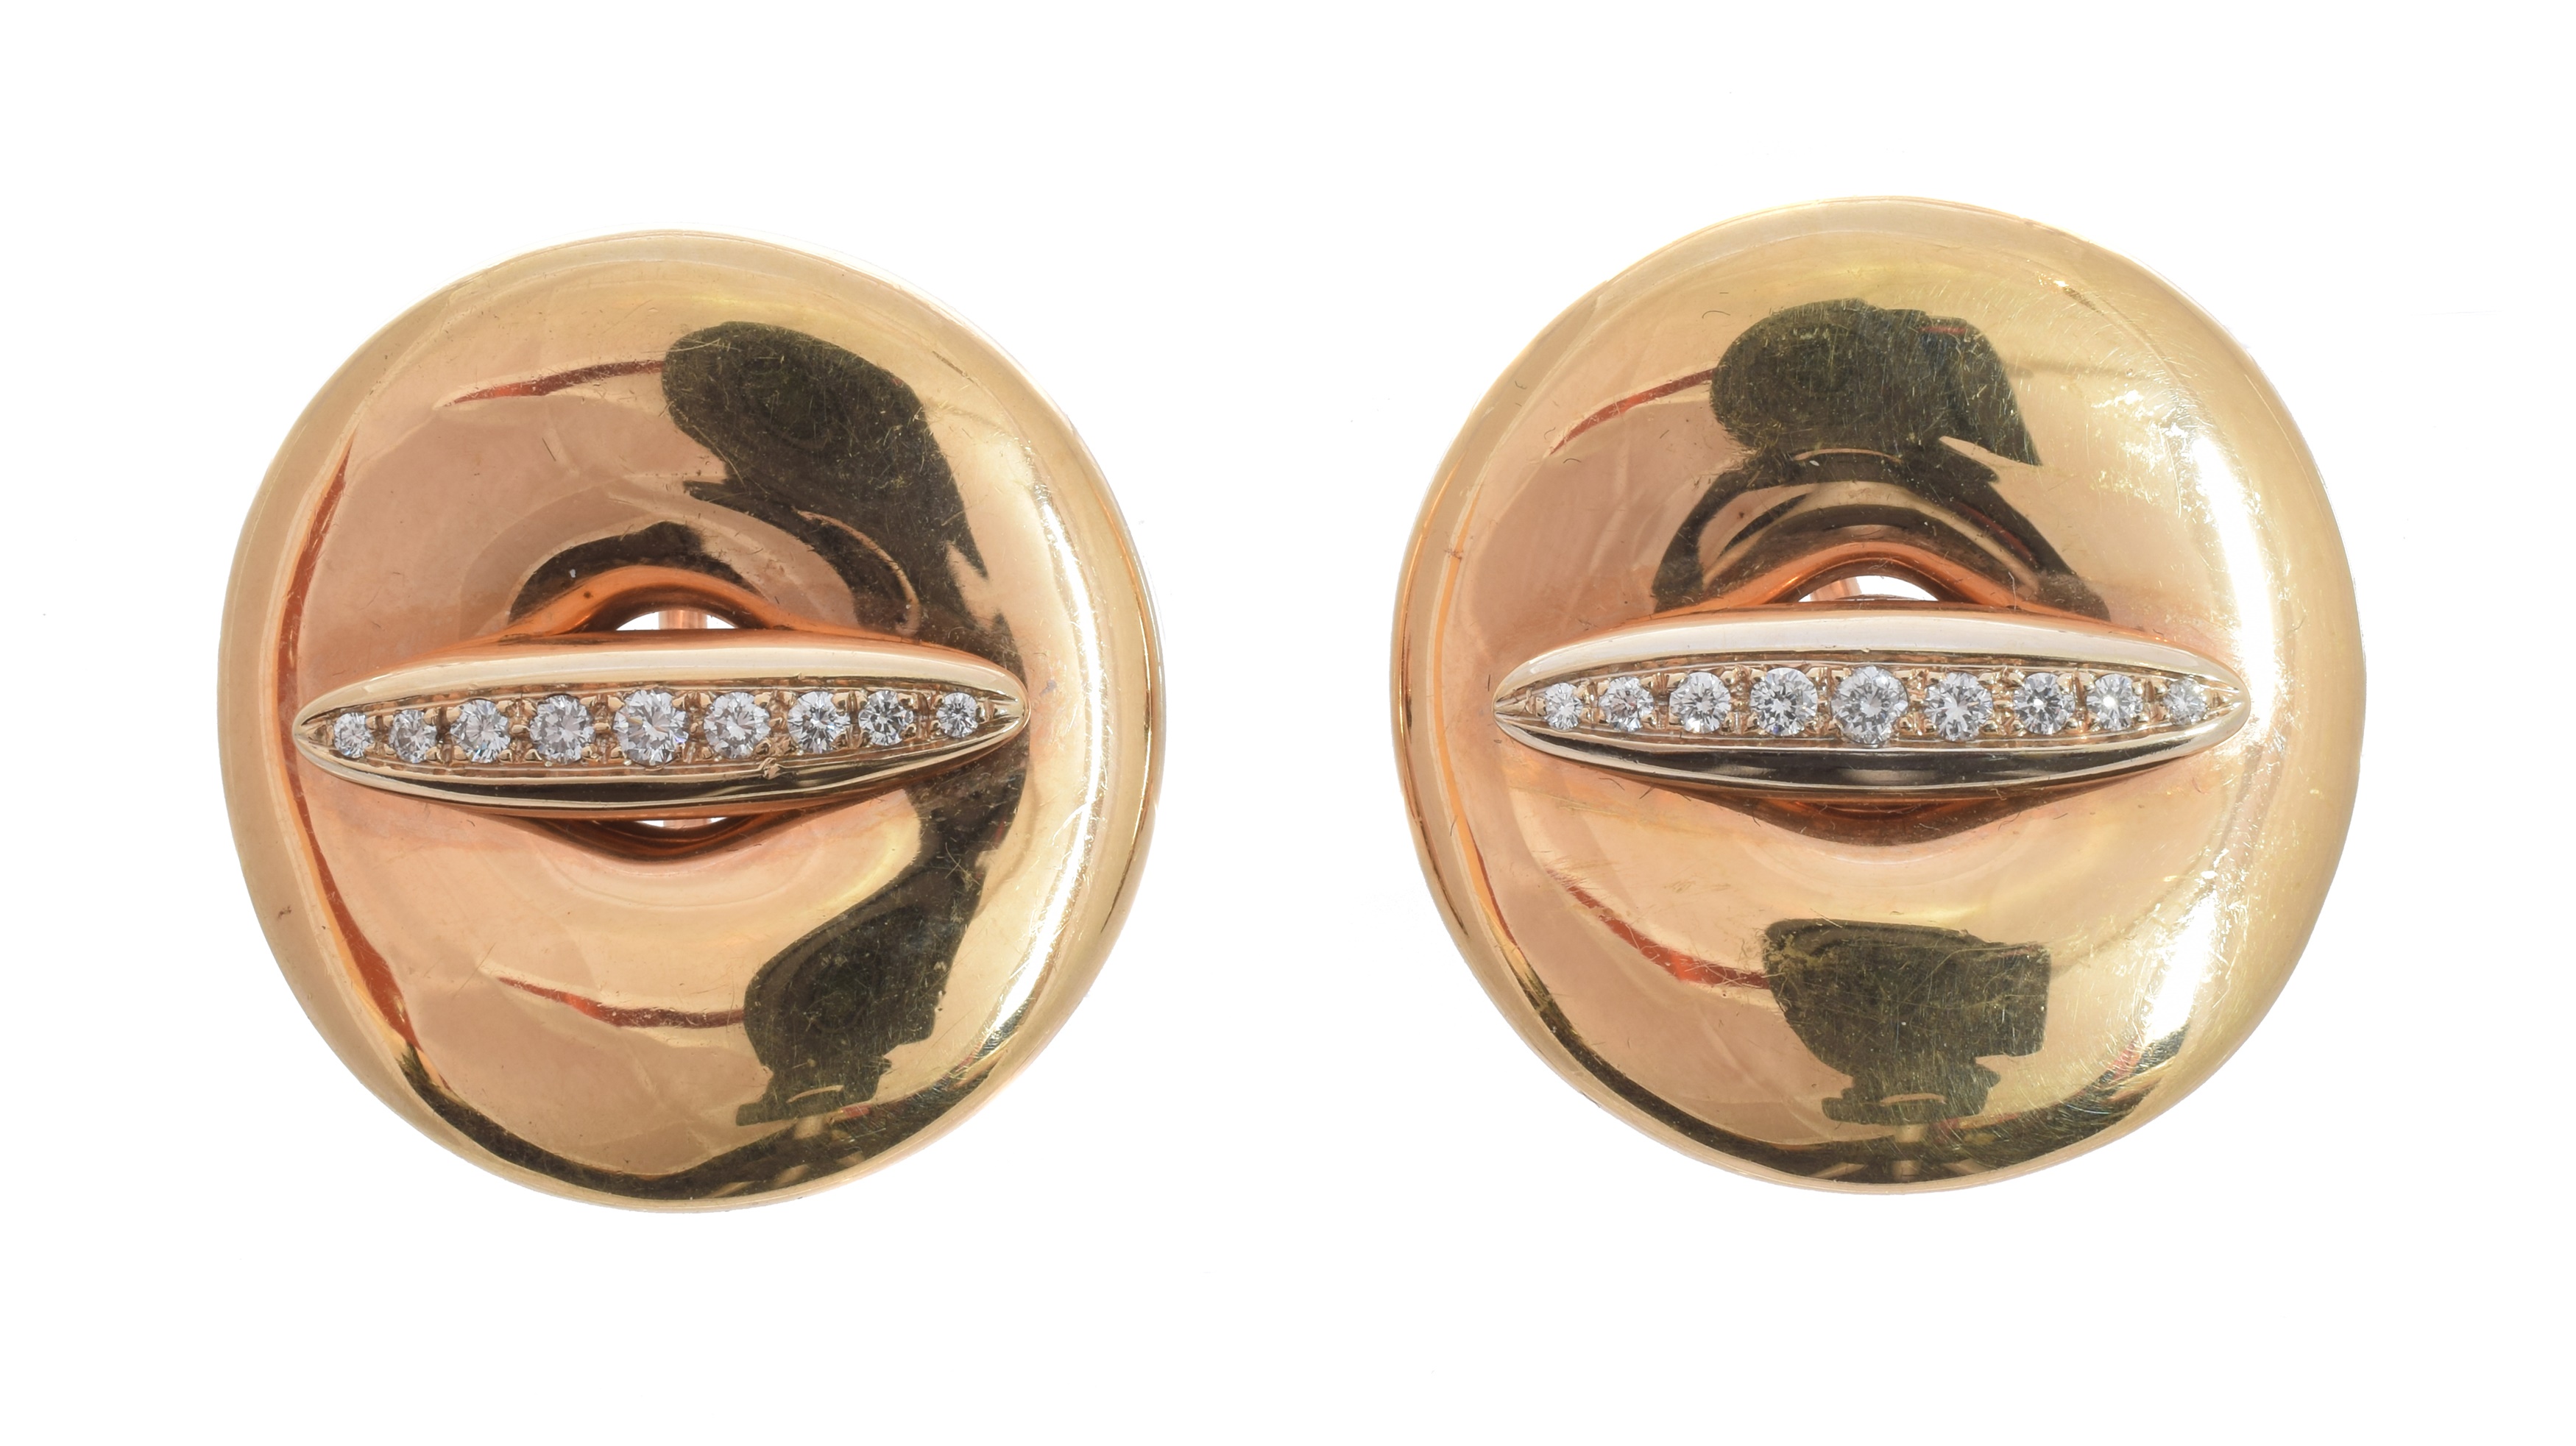 A pair of Gavello 18ct gold and diamond earrings